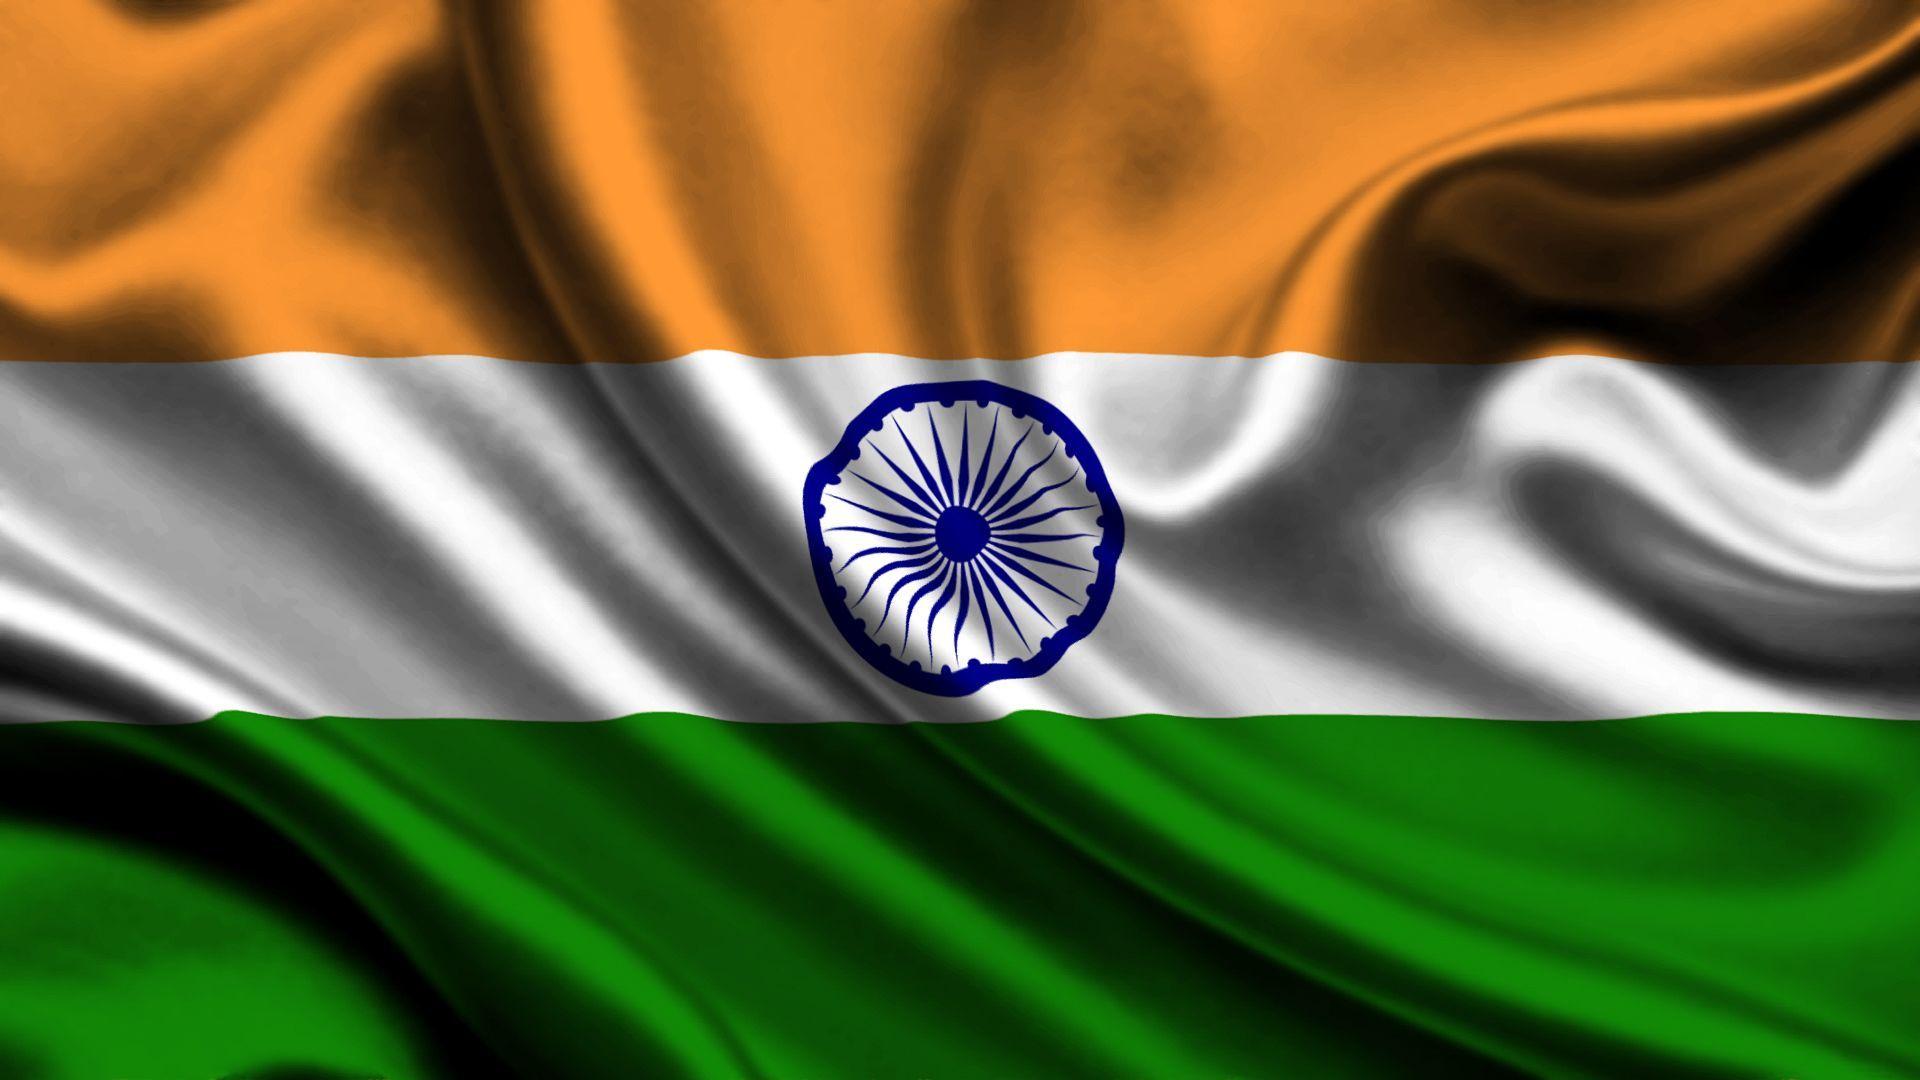 500 Indian Flag 4k Wallpapers  Background Beautiful Best Available For  Download Indian Flag 4k Images Free On Zicxacomphotos  Zicxa Photos